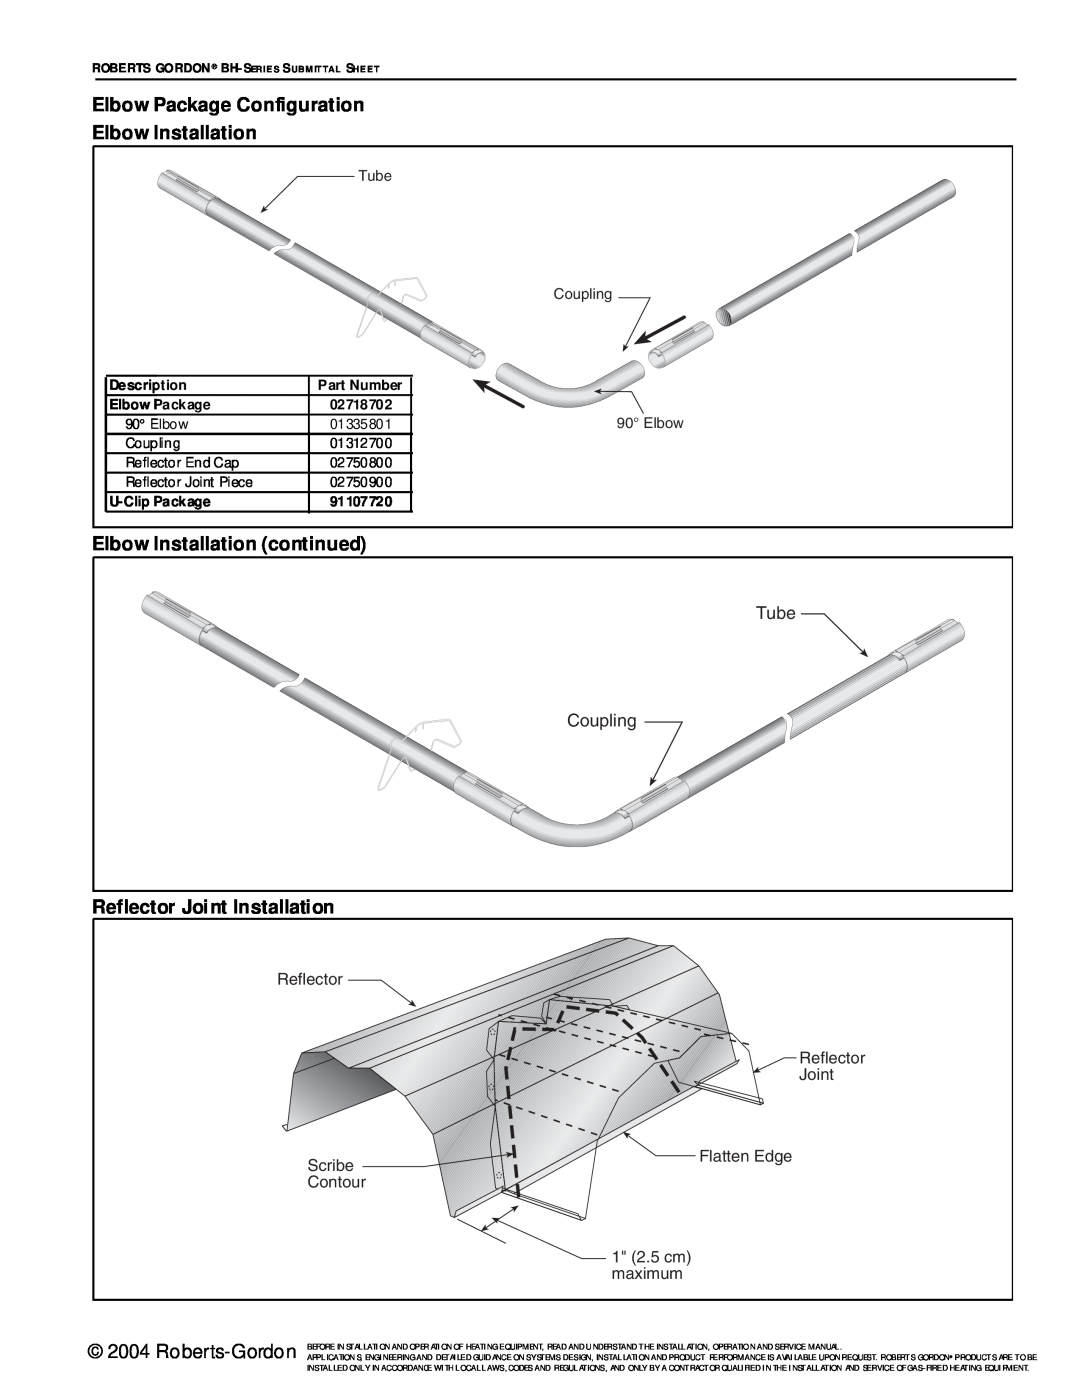 Roberts Gorden BH Series service manual Description, Part Number, Elbow Package, 02718702, U-ClipPackage, 91107720 